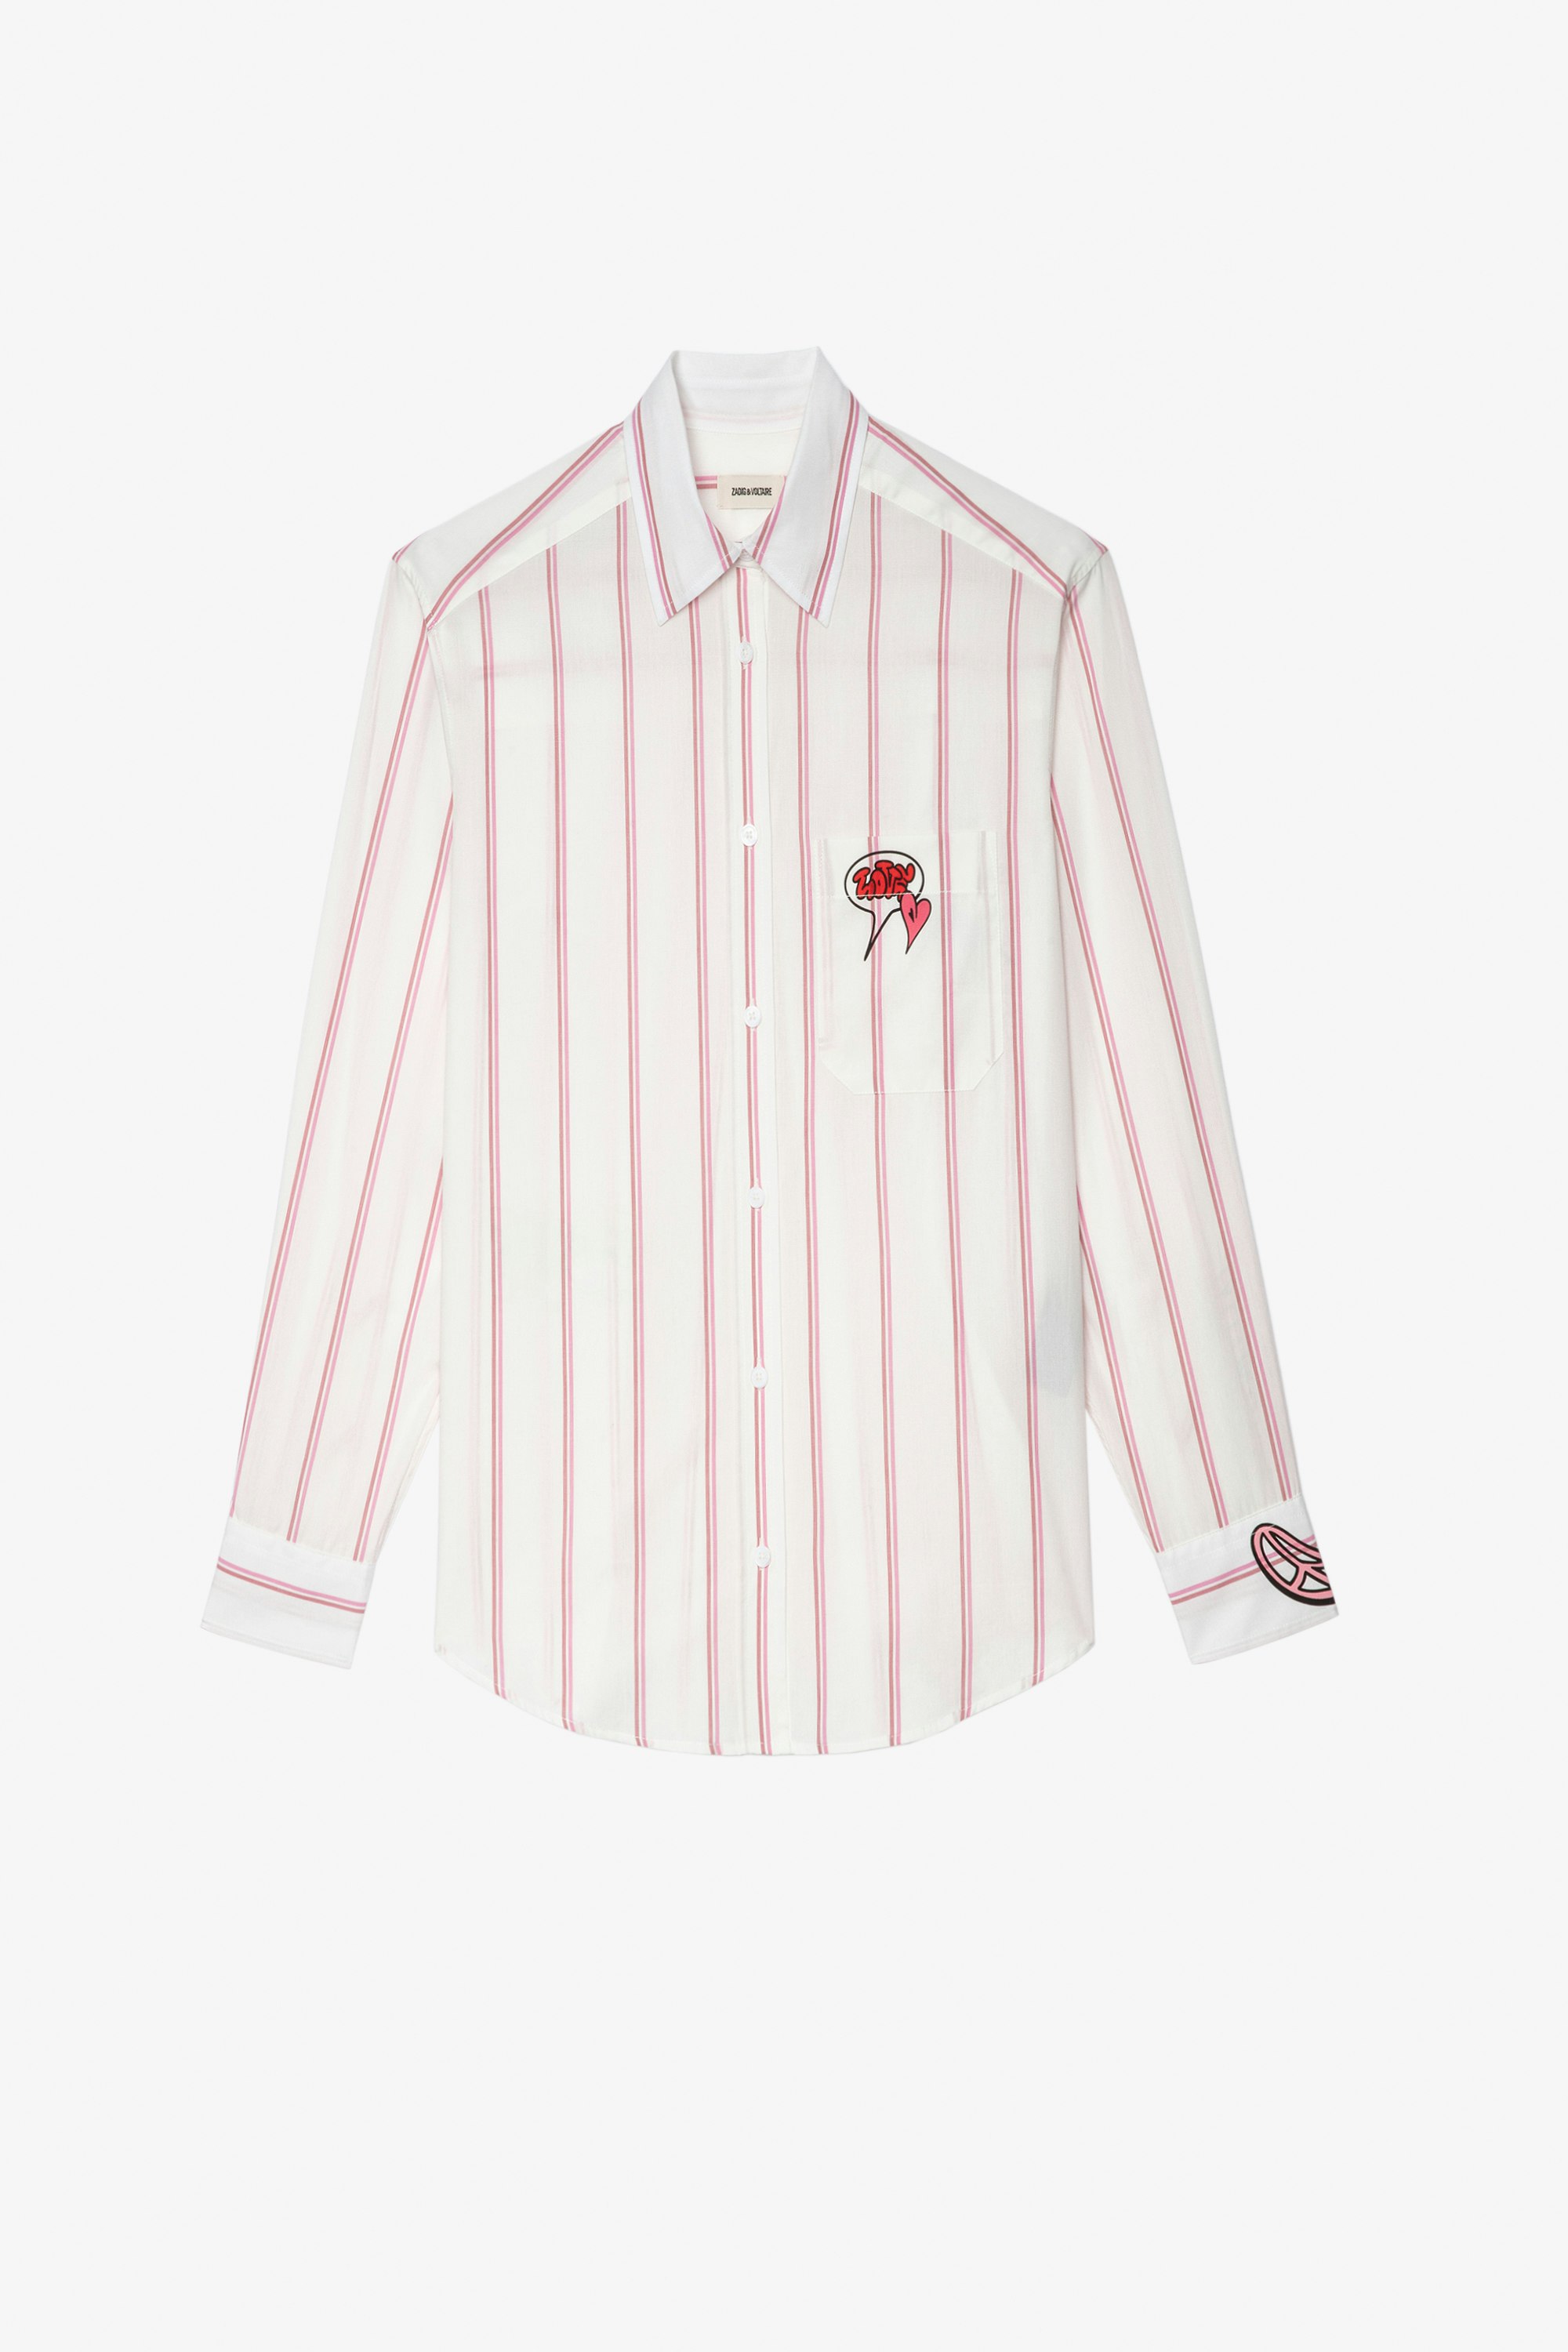 Tais Shirt Women's off-white and pink cotton shirt with patterns